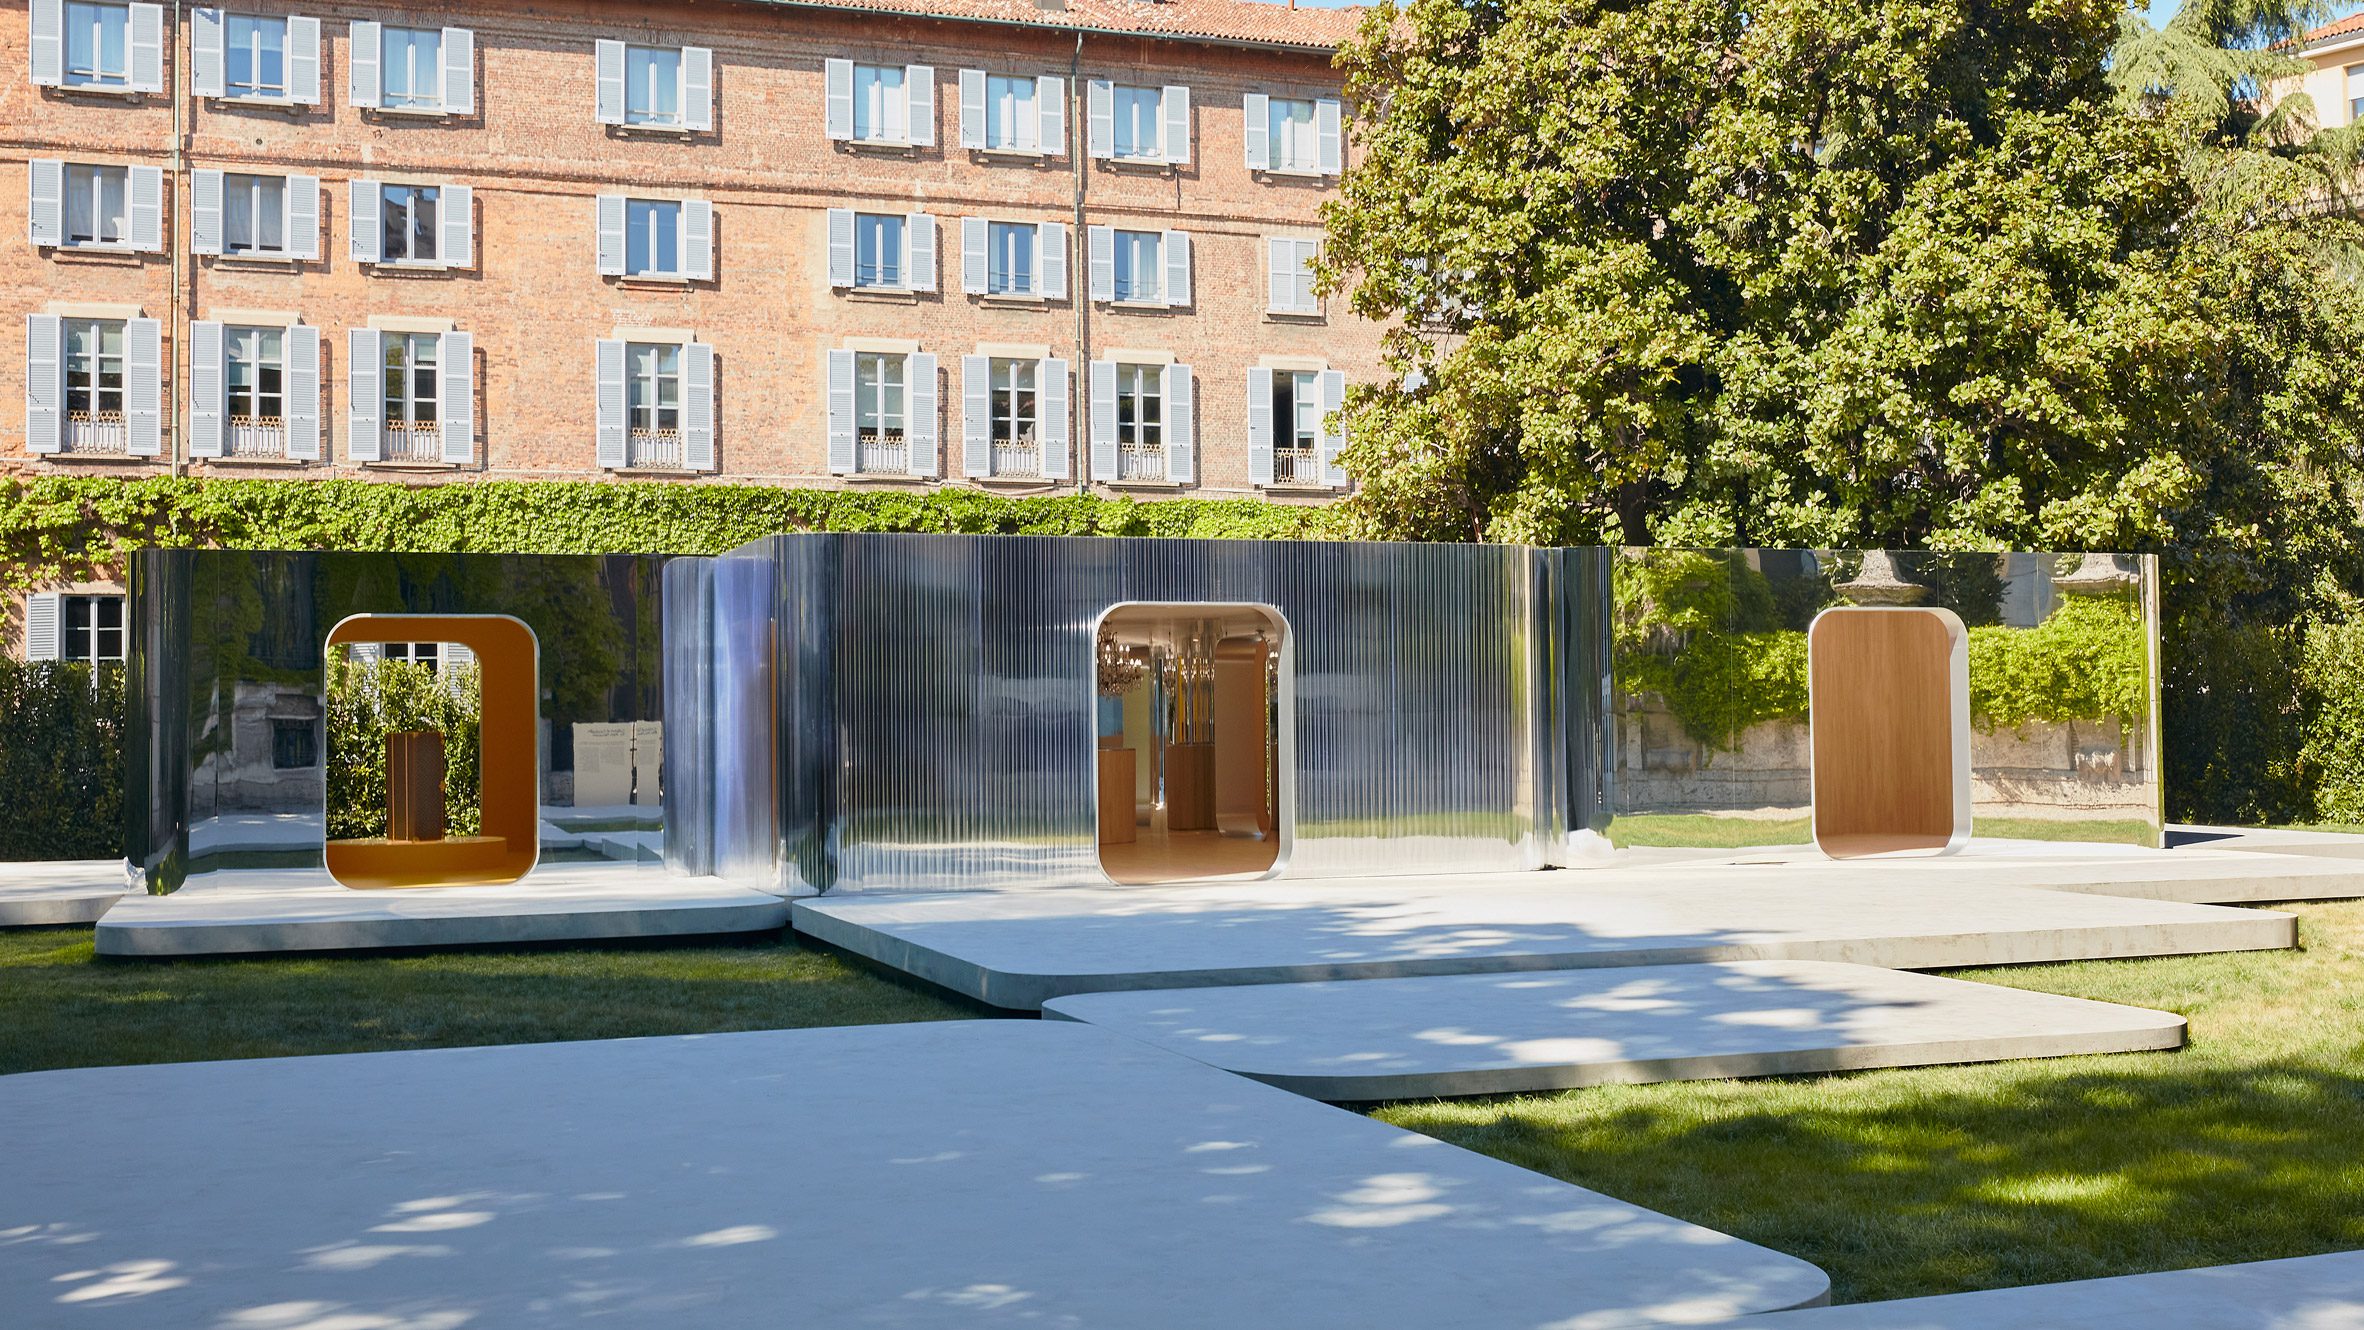 Reflective structures in the gardens of the Palazzo Serbelloni